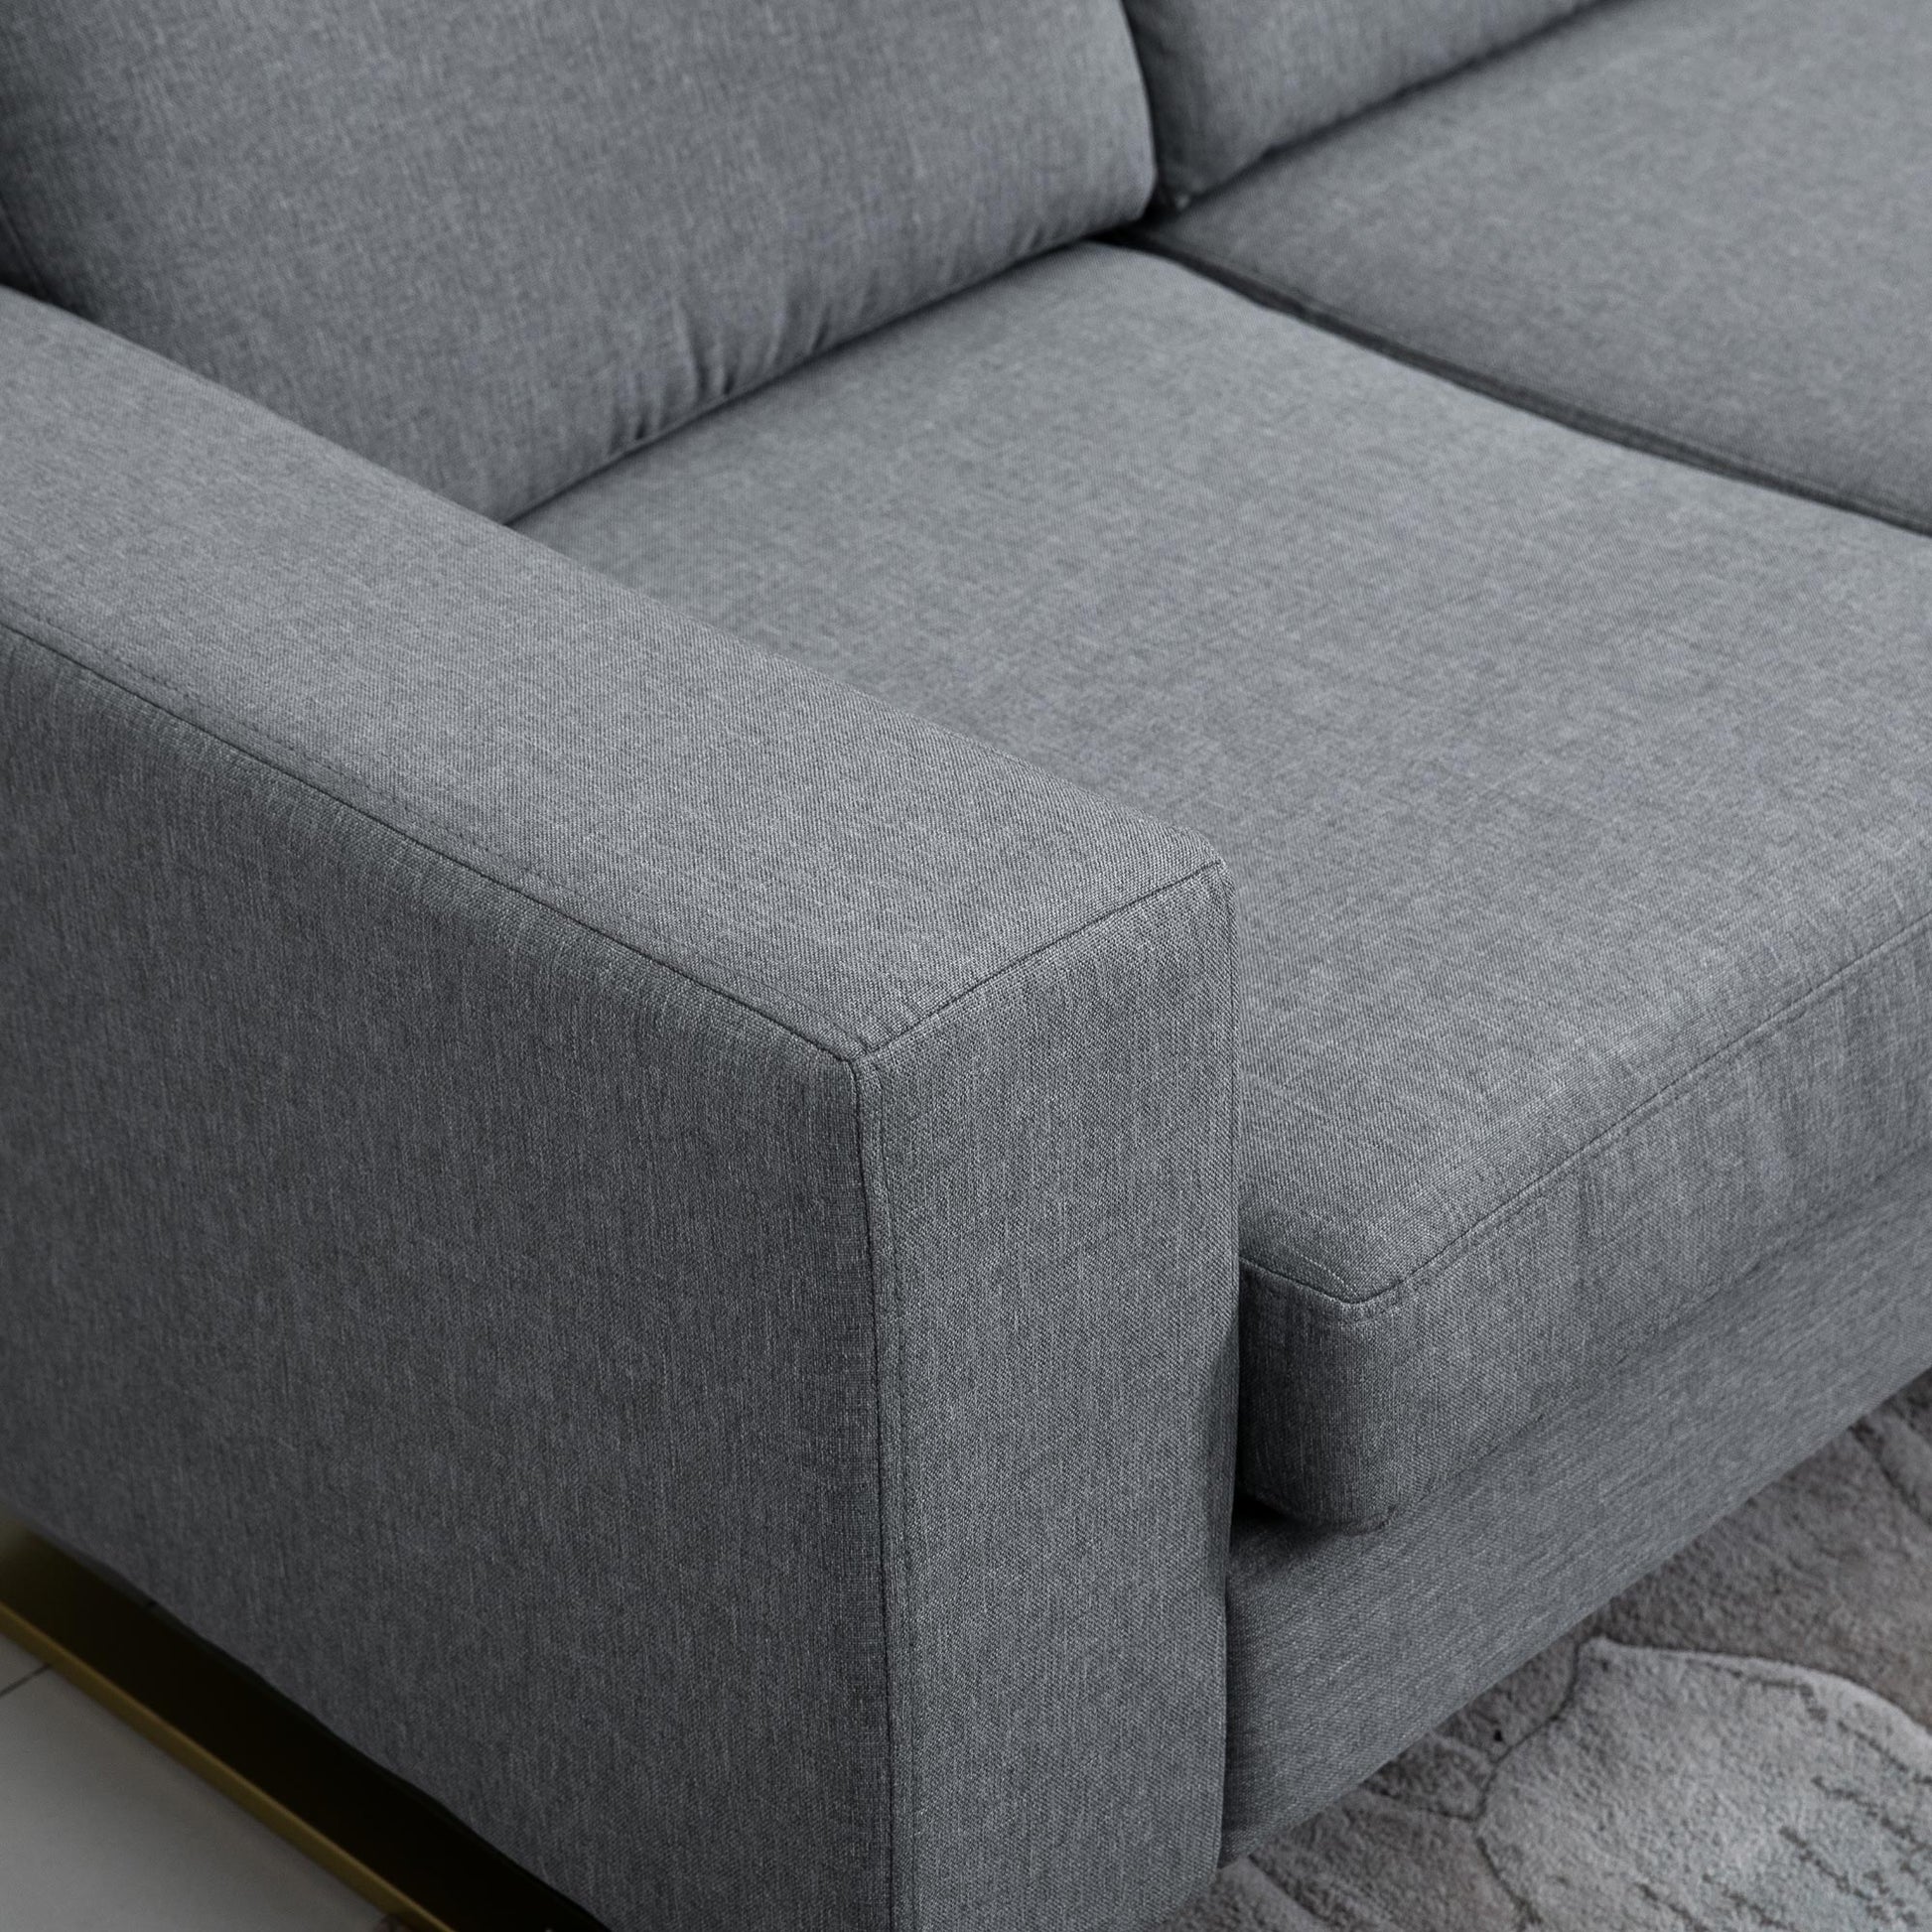 Modern 3 Seat Sofa, Linen Upholstered Cozy Padded Couch with Steel Leg, Backrest and Wide Armrest, Grey at Gallery Canada